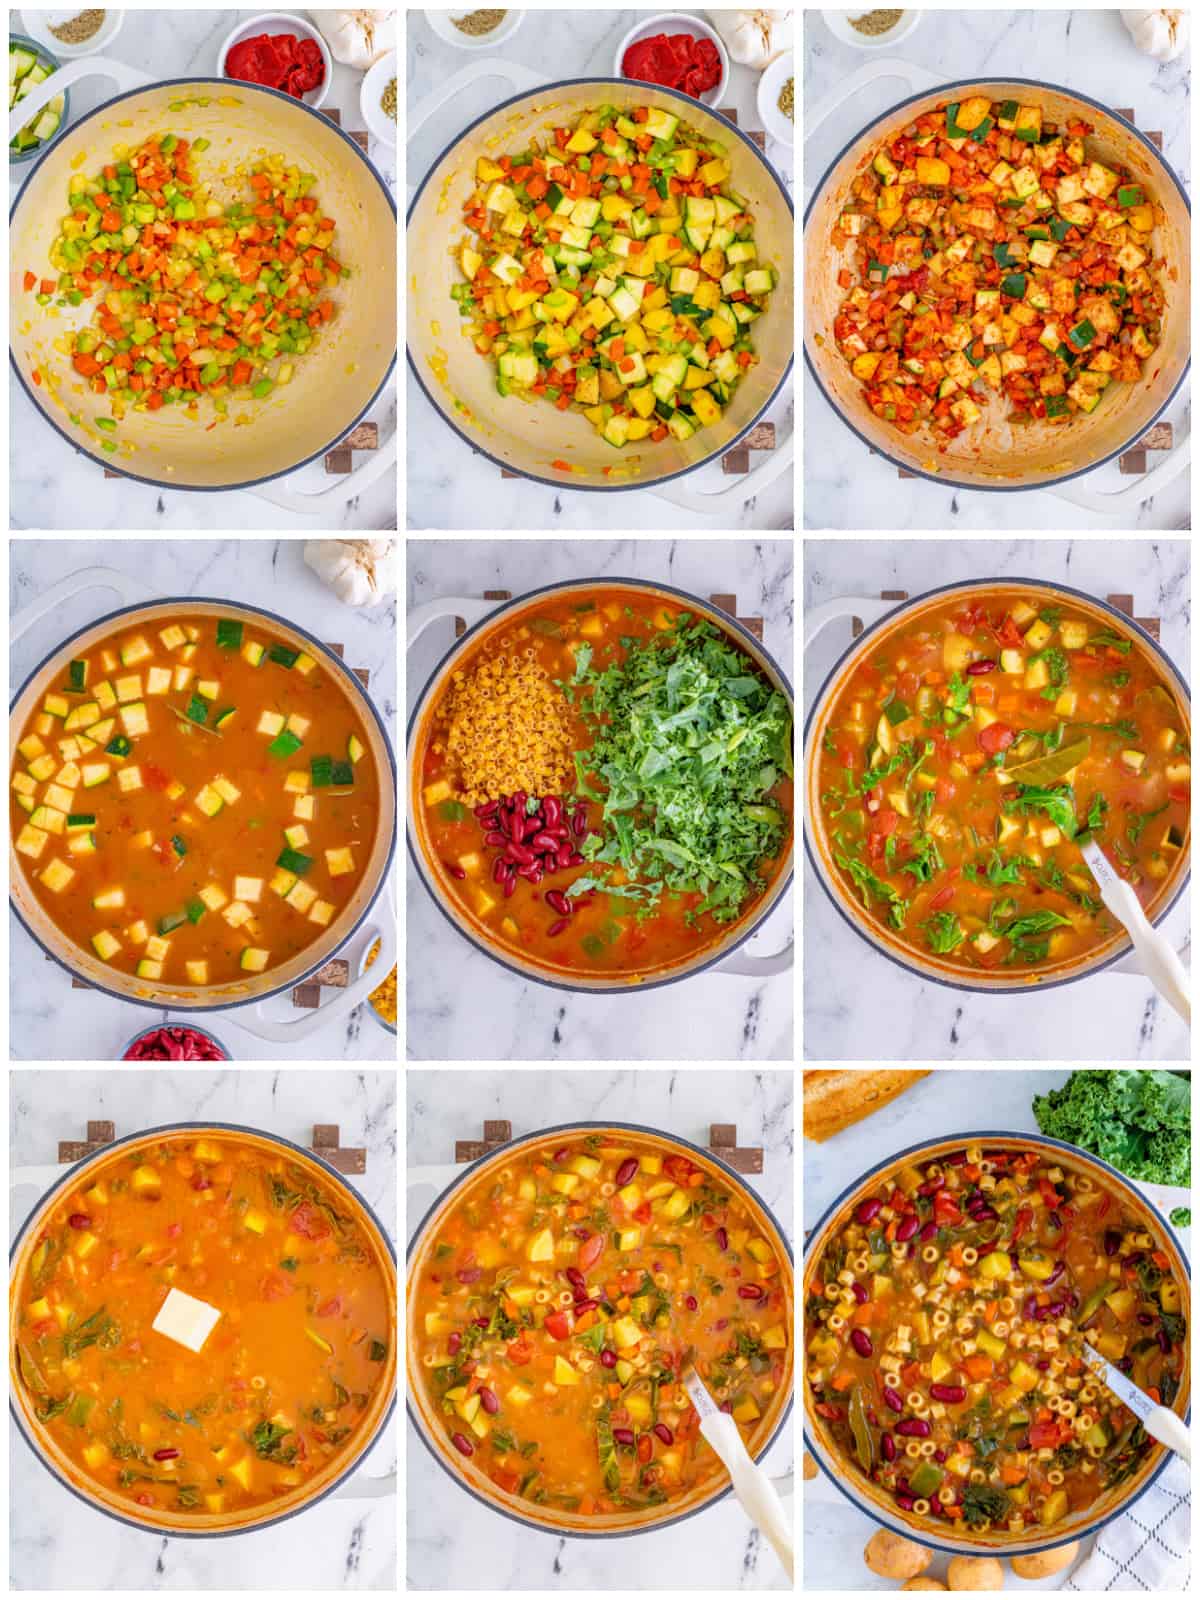 Step by step photos on how to make a Minestrone Soup Recipe.